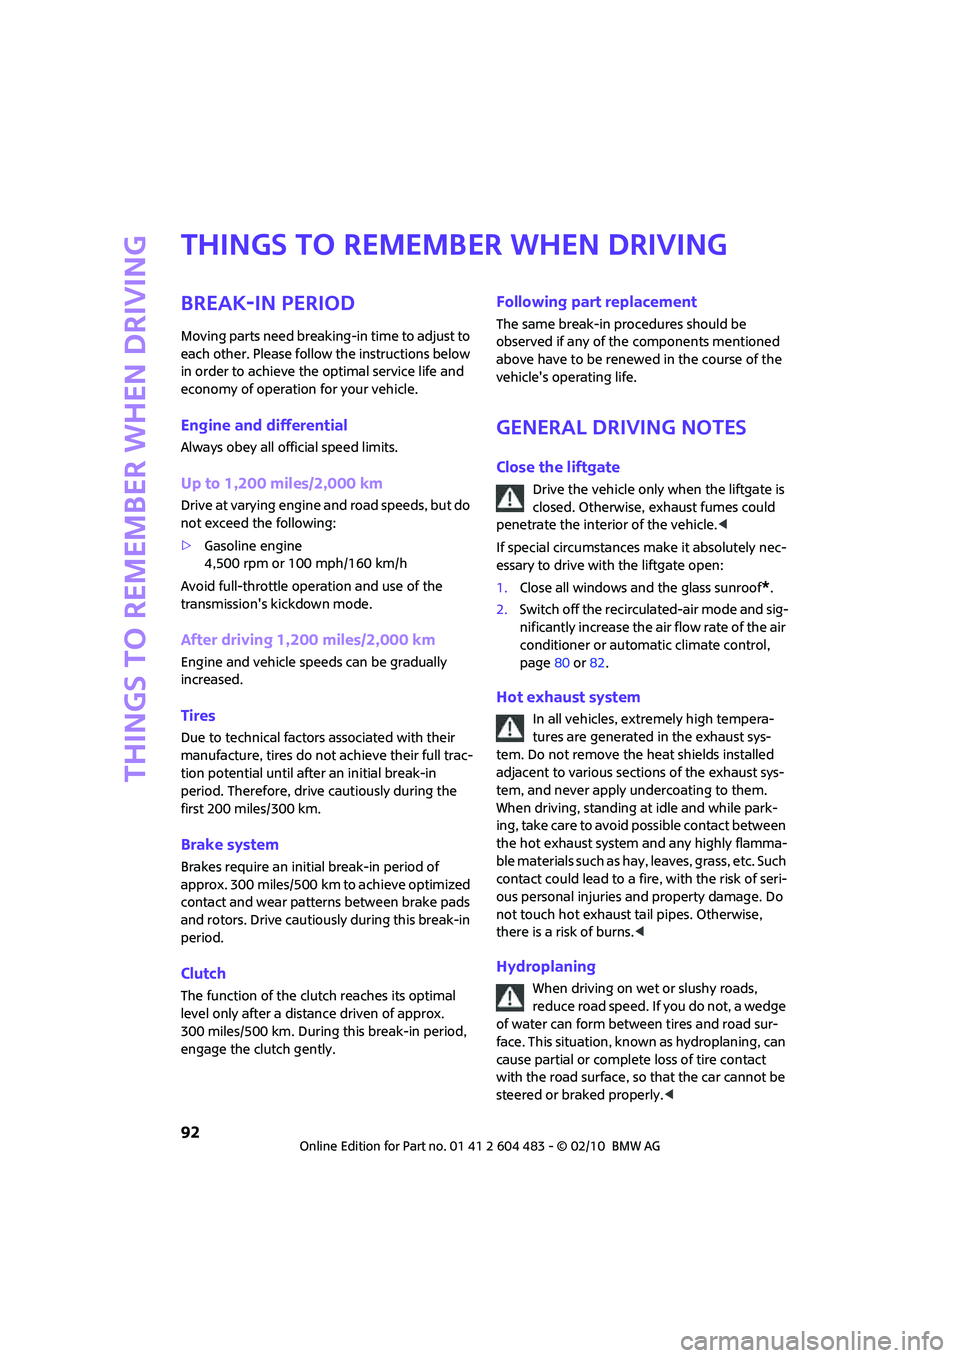 MINI COOPER CONVERTIBLE 2010  Owners Manual Things to remember when driving
92
Things to remember when driving
Break-in period
Moving parts need breaking-in time to adjust to 
each other. Please follow the instructions below 
in order to achiev